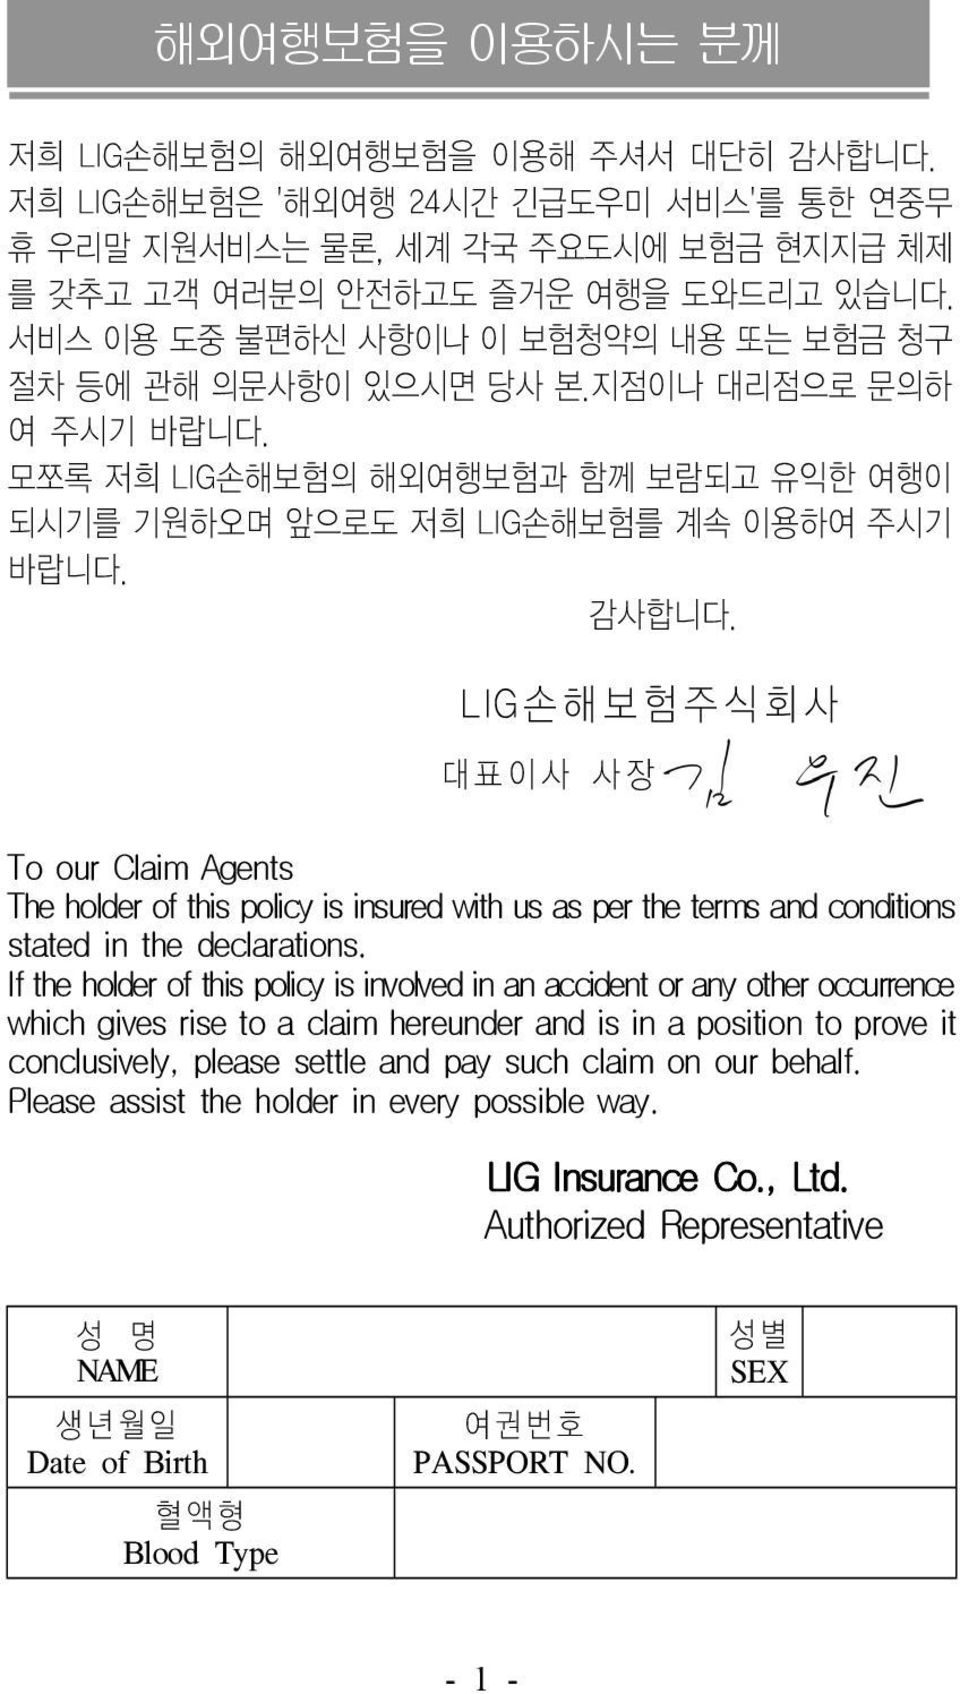 LIG손해보험주식회사 대표이사 사장 To our Claim Agents The holder of this policy is insured with us as per the terms and conditions stated in the declarations.